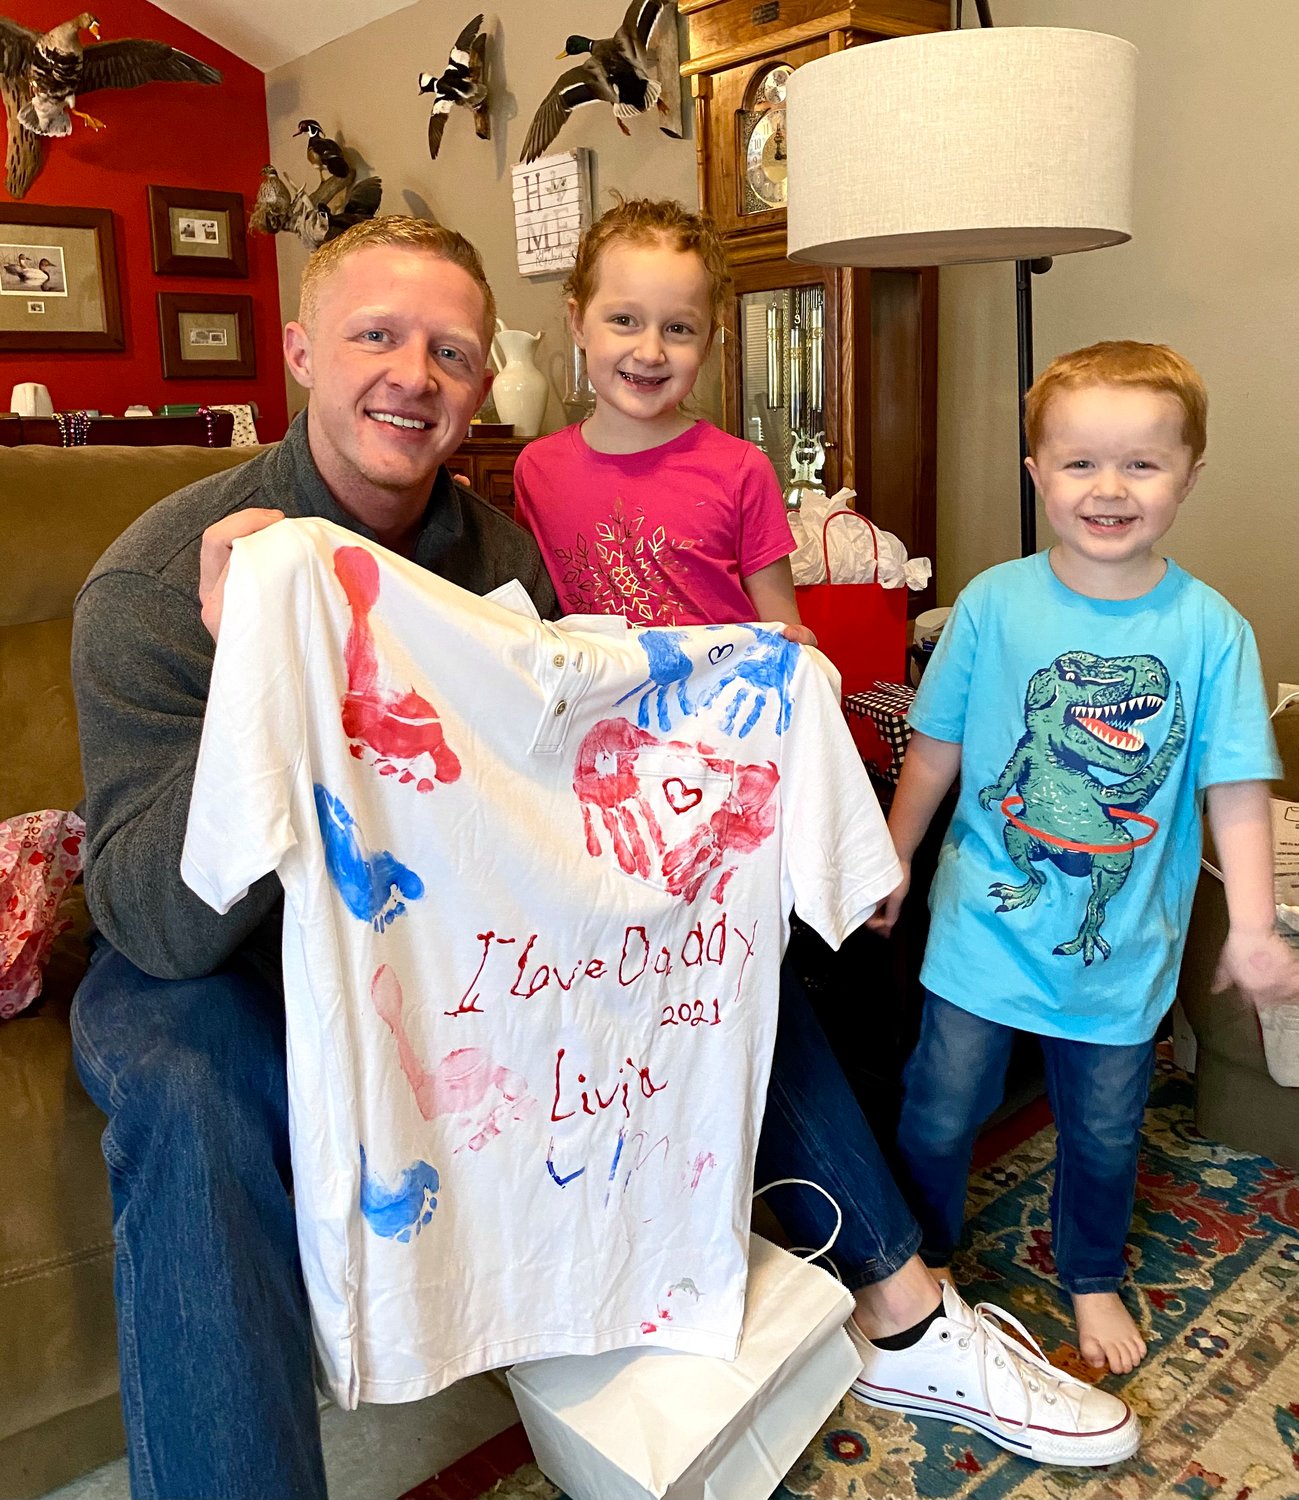 Dalton loved his Livia and Liam and spending time with them was very important. His children love him a great deal and presented him with this shirt as an expression of their love and admiration.